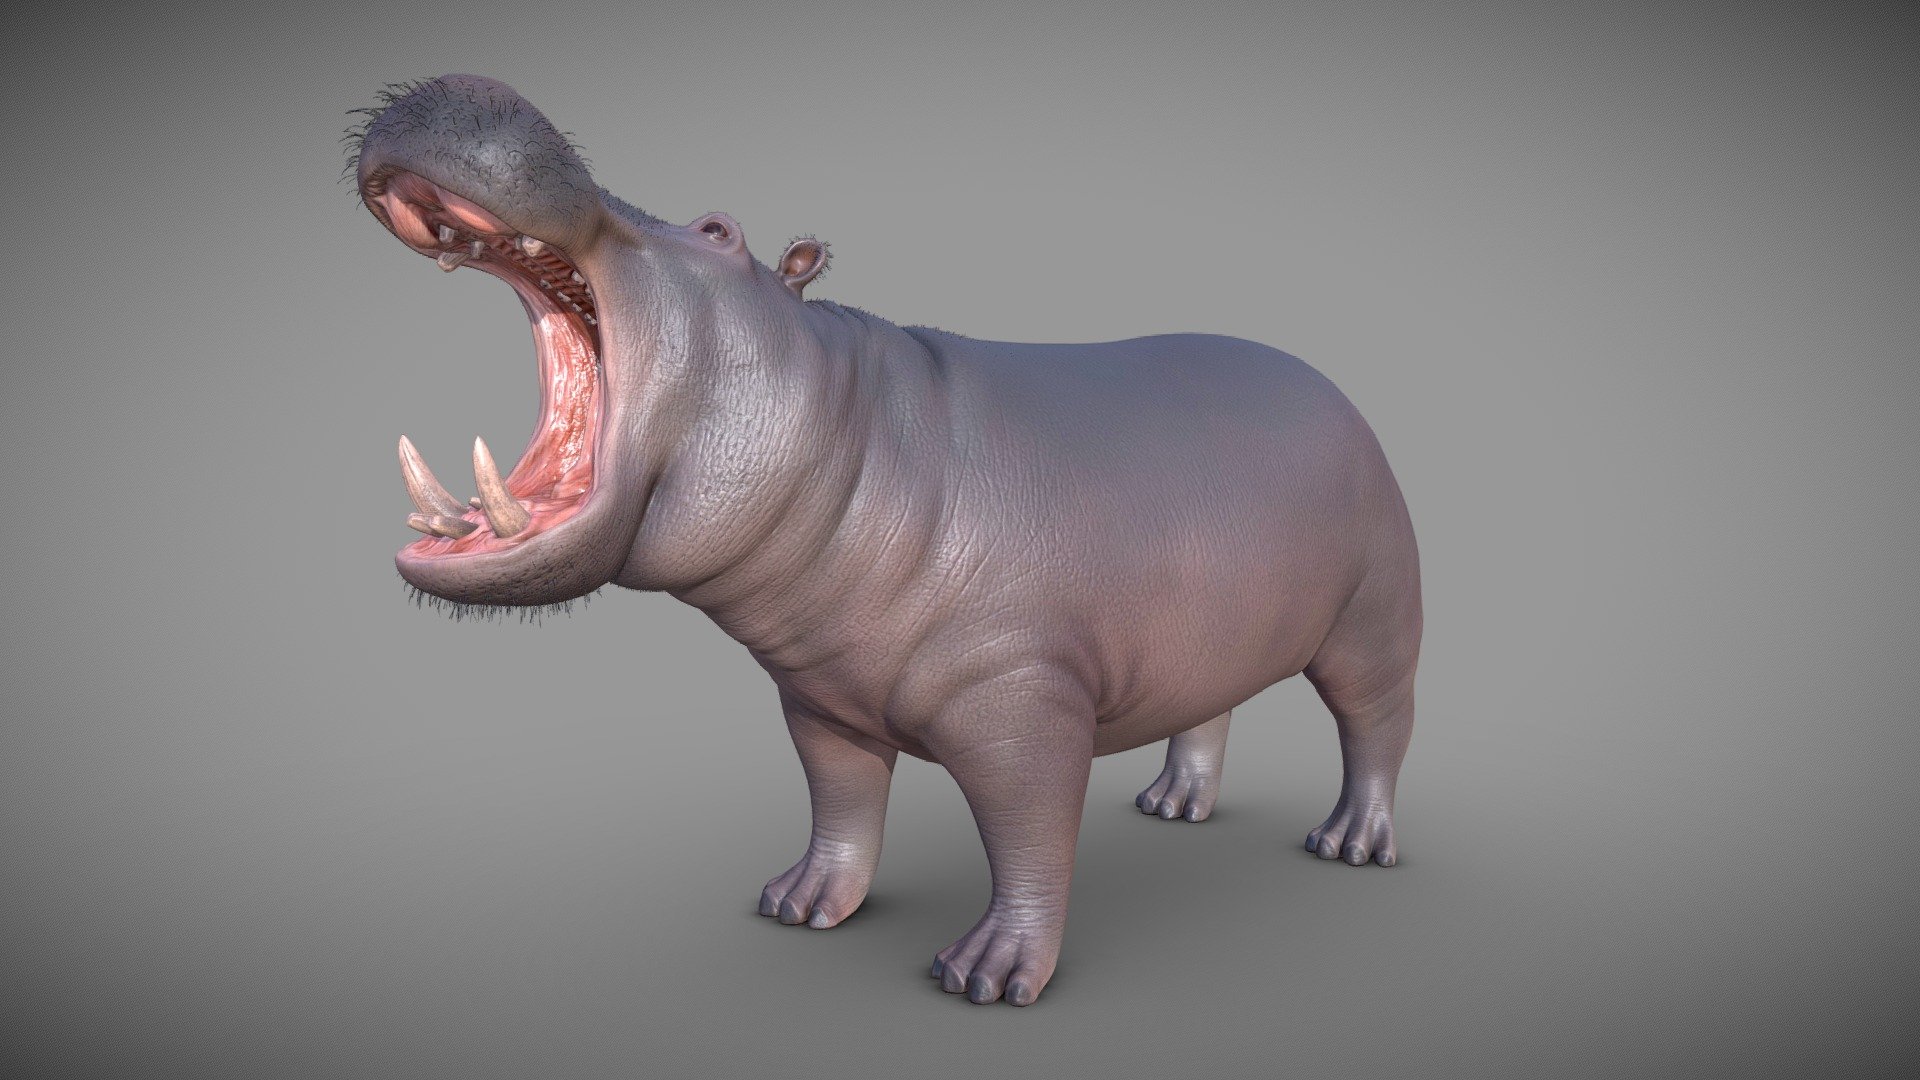 Behold the majesty of the African riverbanks with this stunning 3D model of a Hippopotamus. Crafted with meticulous attention to detail, this lifelike representation captures the essence of one of the world's most iconic and formidable creatures.

Every aspect of the hippo's anatomy, from its massive head to its robust body, is sculpted with precision, showcasing the artistry and attention to detail that went into its creation.

Whether you're an enthusiast of wildlife, an educator, or a 3D artist looking to enhance your portfolio, this Hippopotamus 3D model is a remarkable and versatile asset that can be used in various contexts, from game design to virtual tours and educational materials.

Experience the wonder of the animal kingdom up close with this exceptional 3D representation of the magnificent hippo 3d model